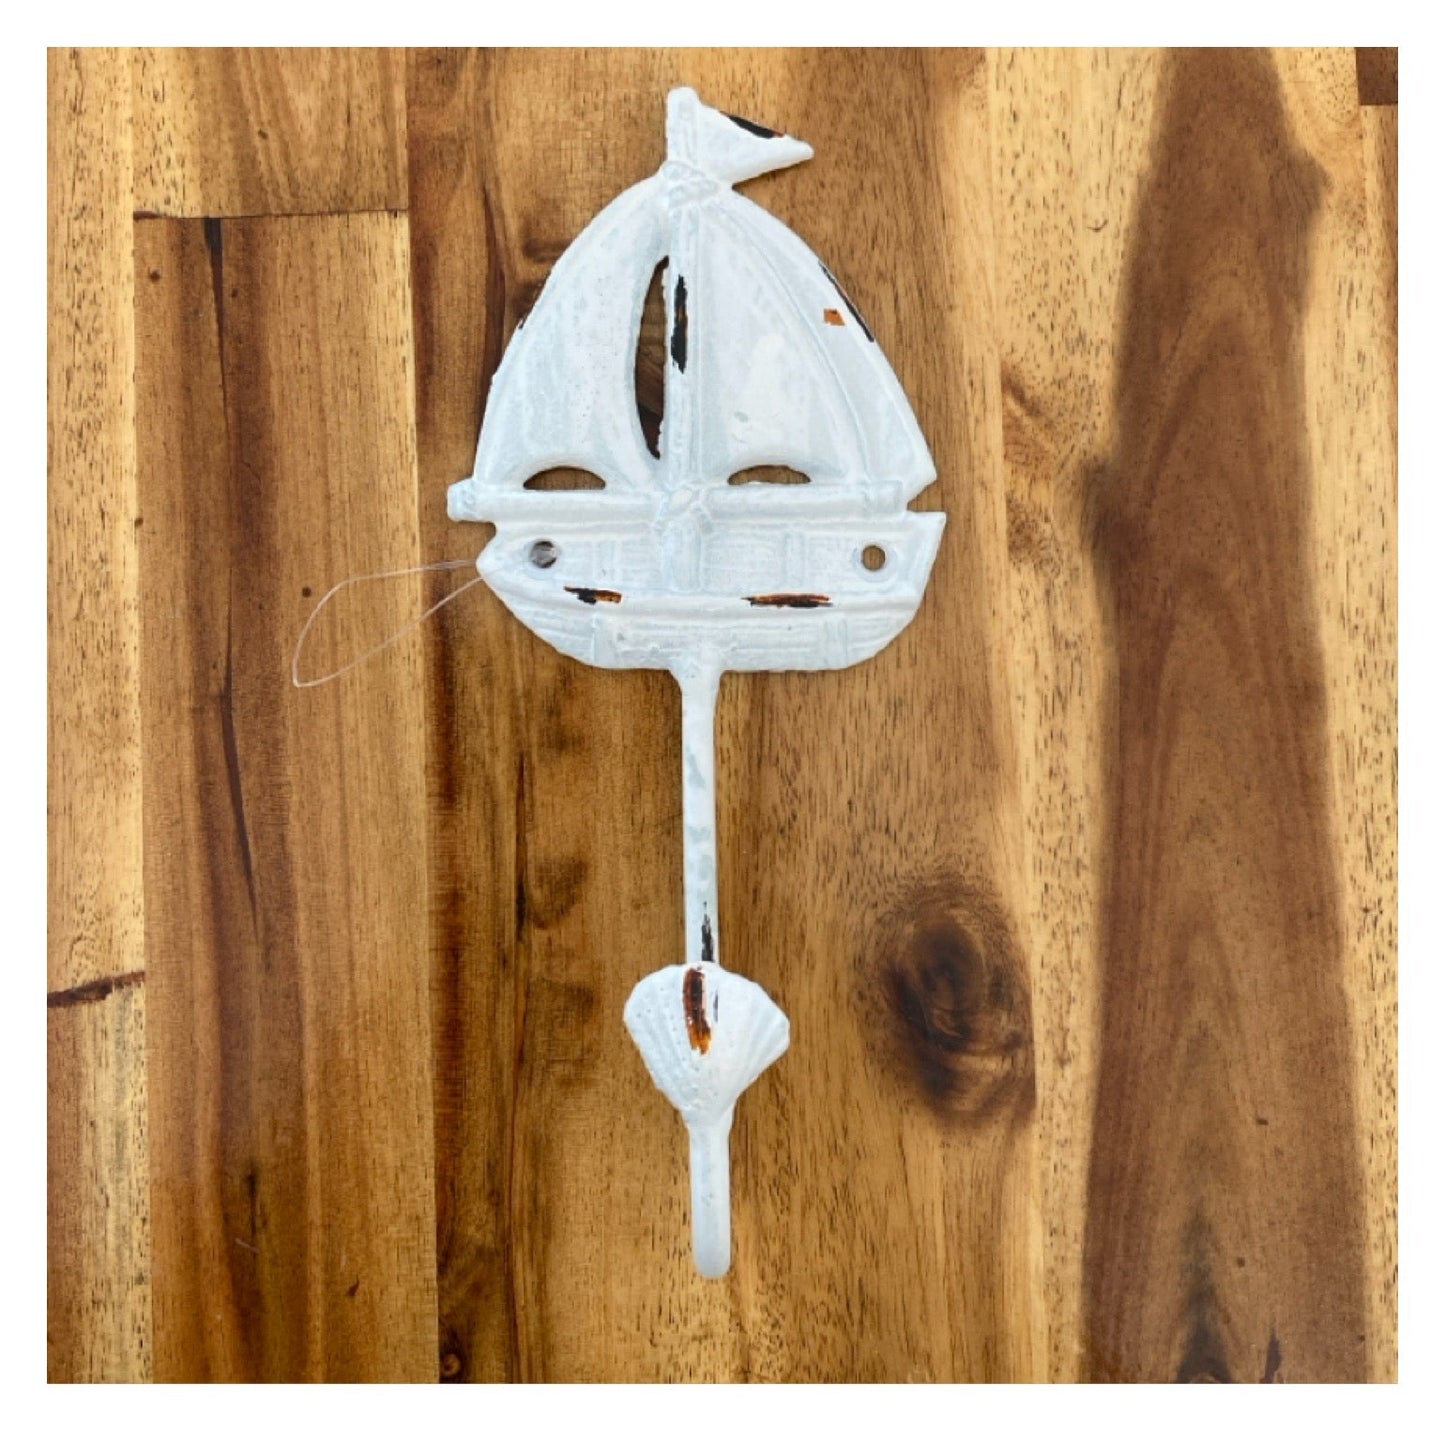 Hook Boat Nautical Coastal - The Renmy Store Homewares & Gifts 